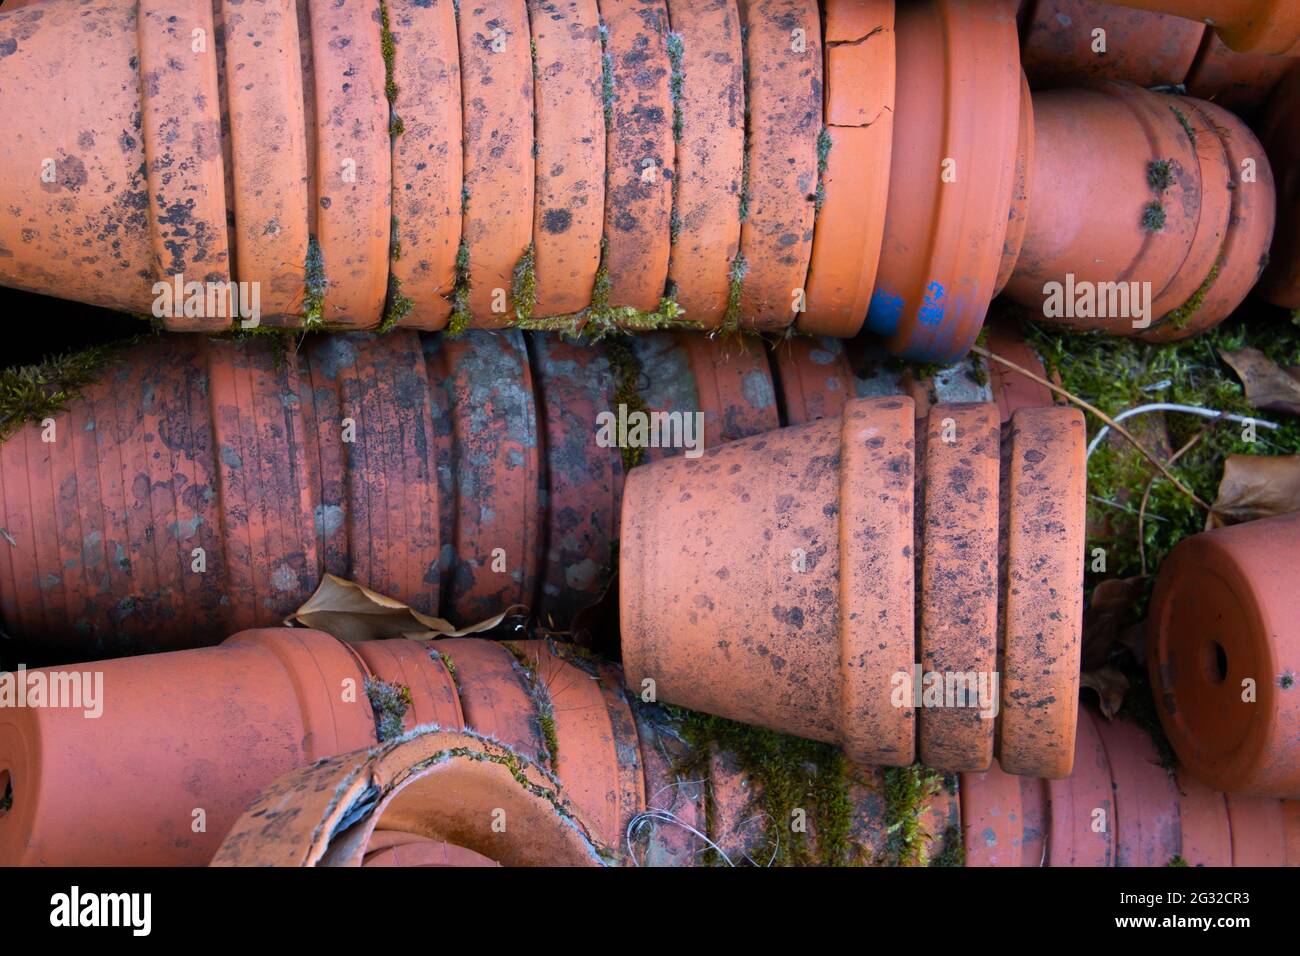 https://c8.alamy.com/comp/2G32CR3/dirty-stacked-terracotta-flower-pots-laying-on-the-floor-of-a-greenery-2G32CR3.jpg